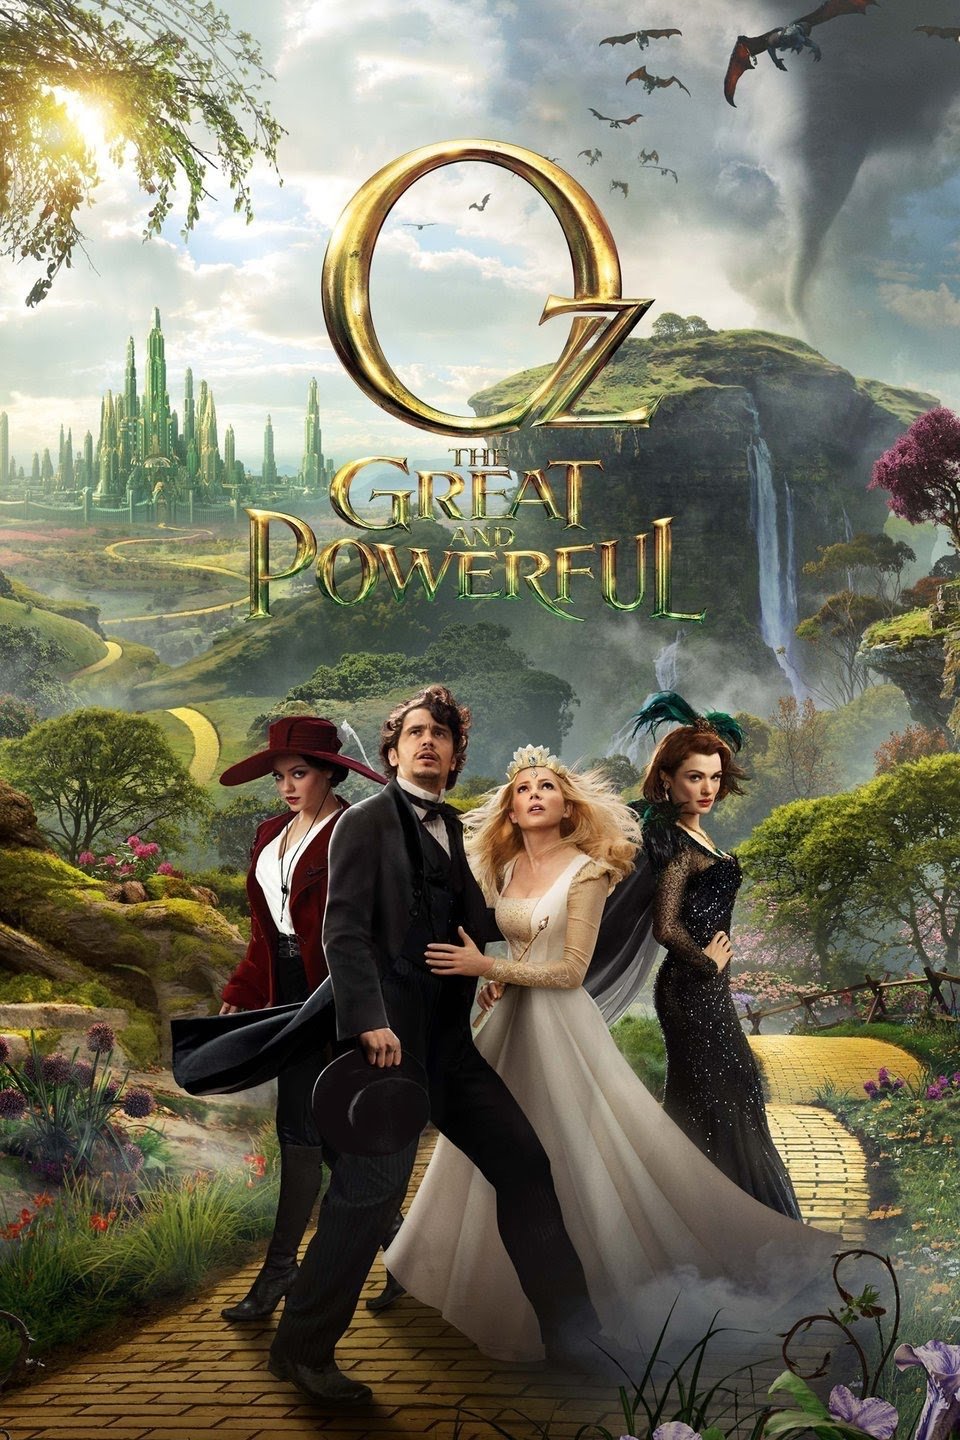 Oz: The Great and Powerful (2013) Vudu or Movies Anywhere HD redemption only